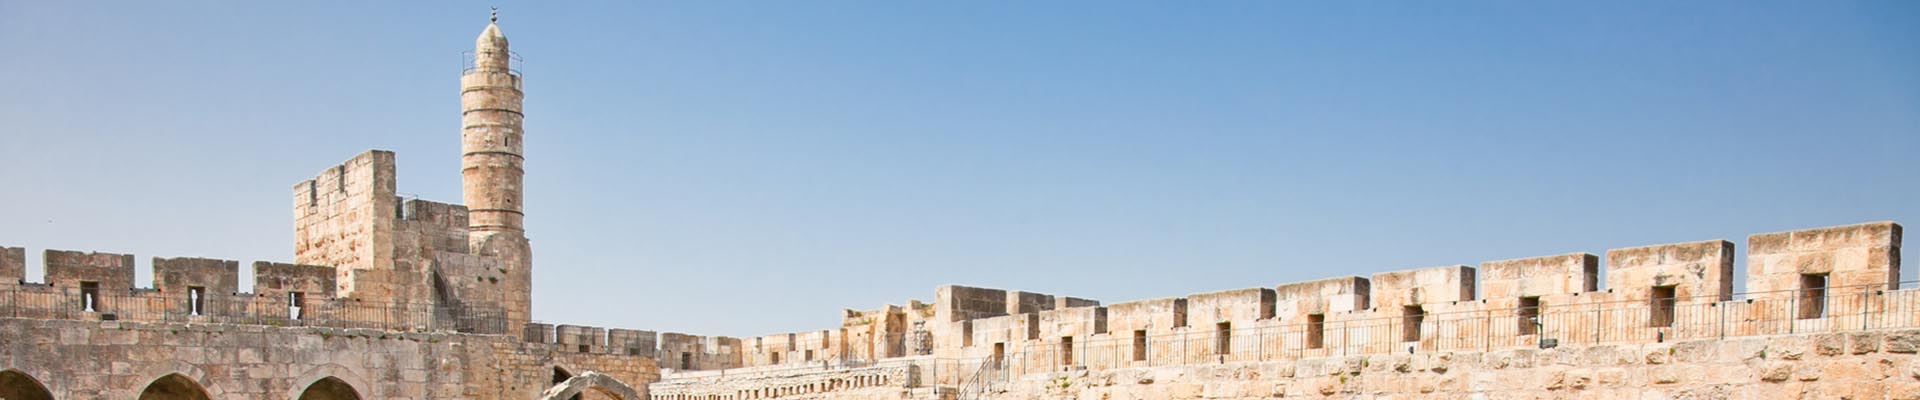 9 Day Jewish Heritage Israel Tour - Small Group Tour